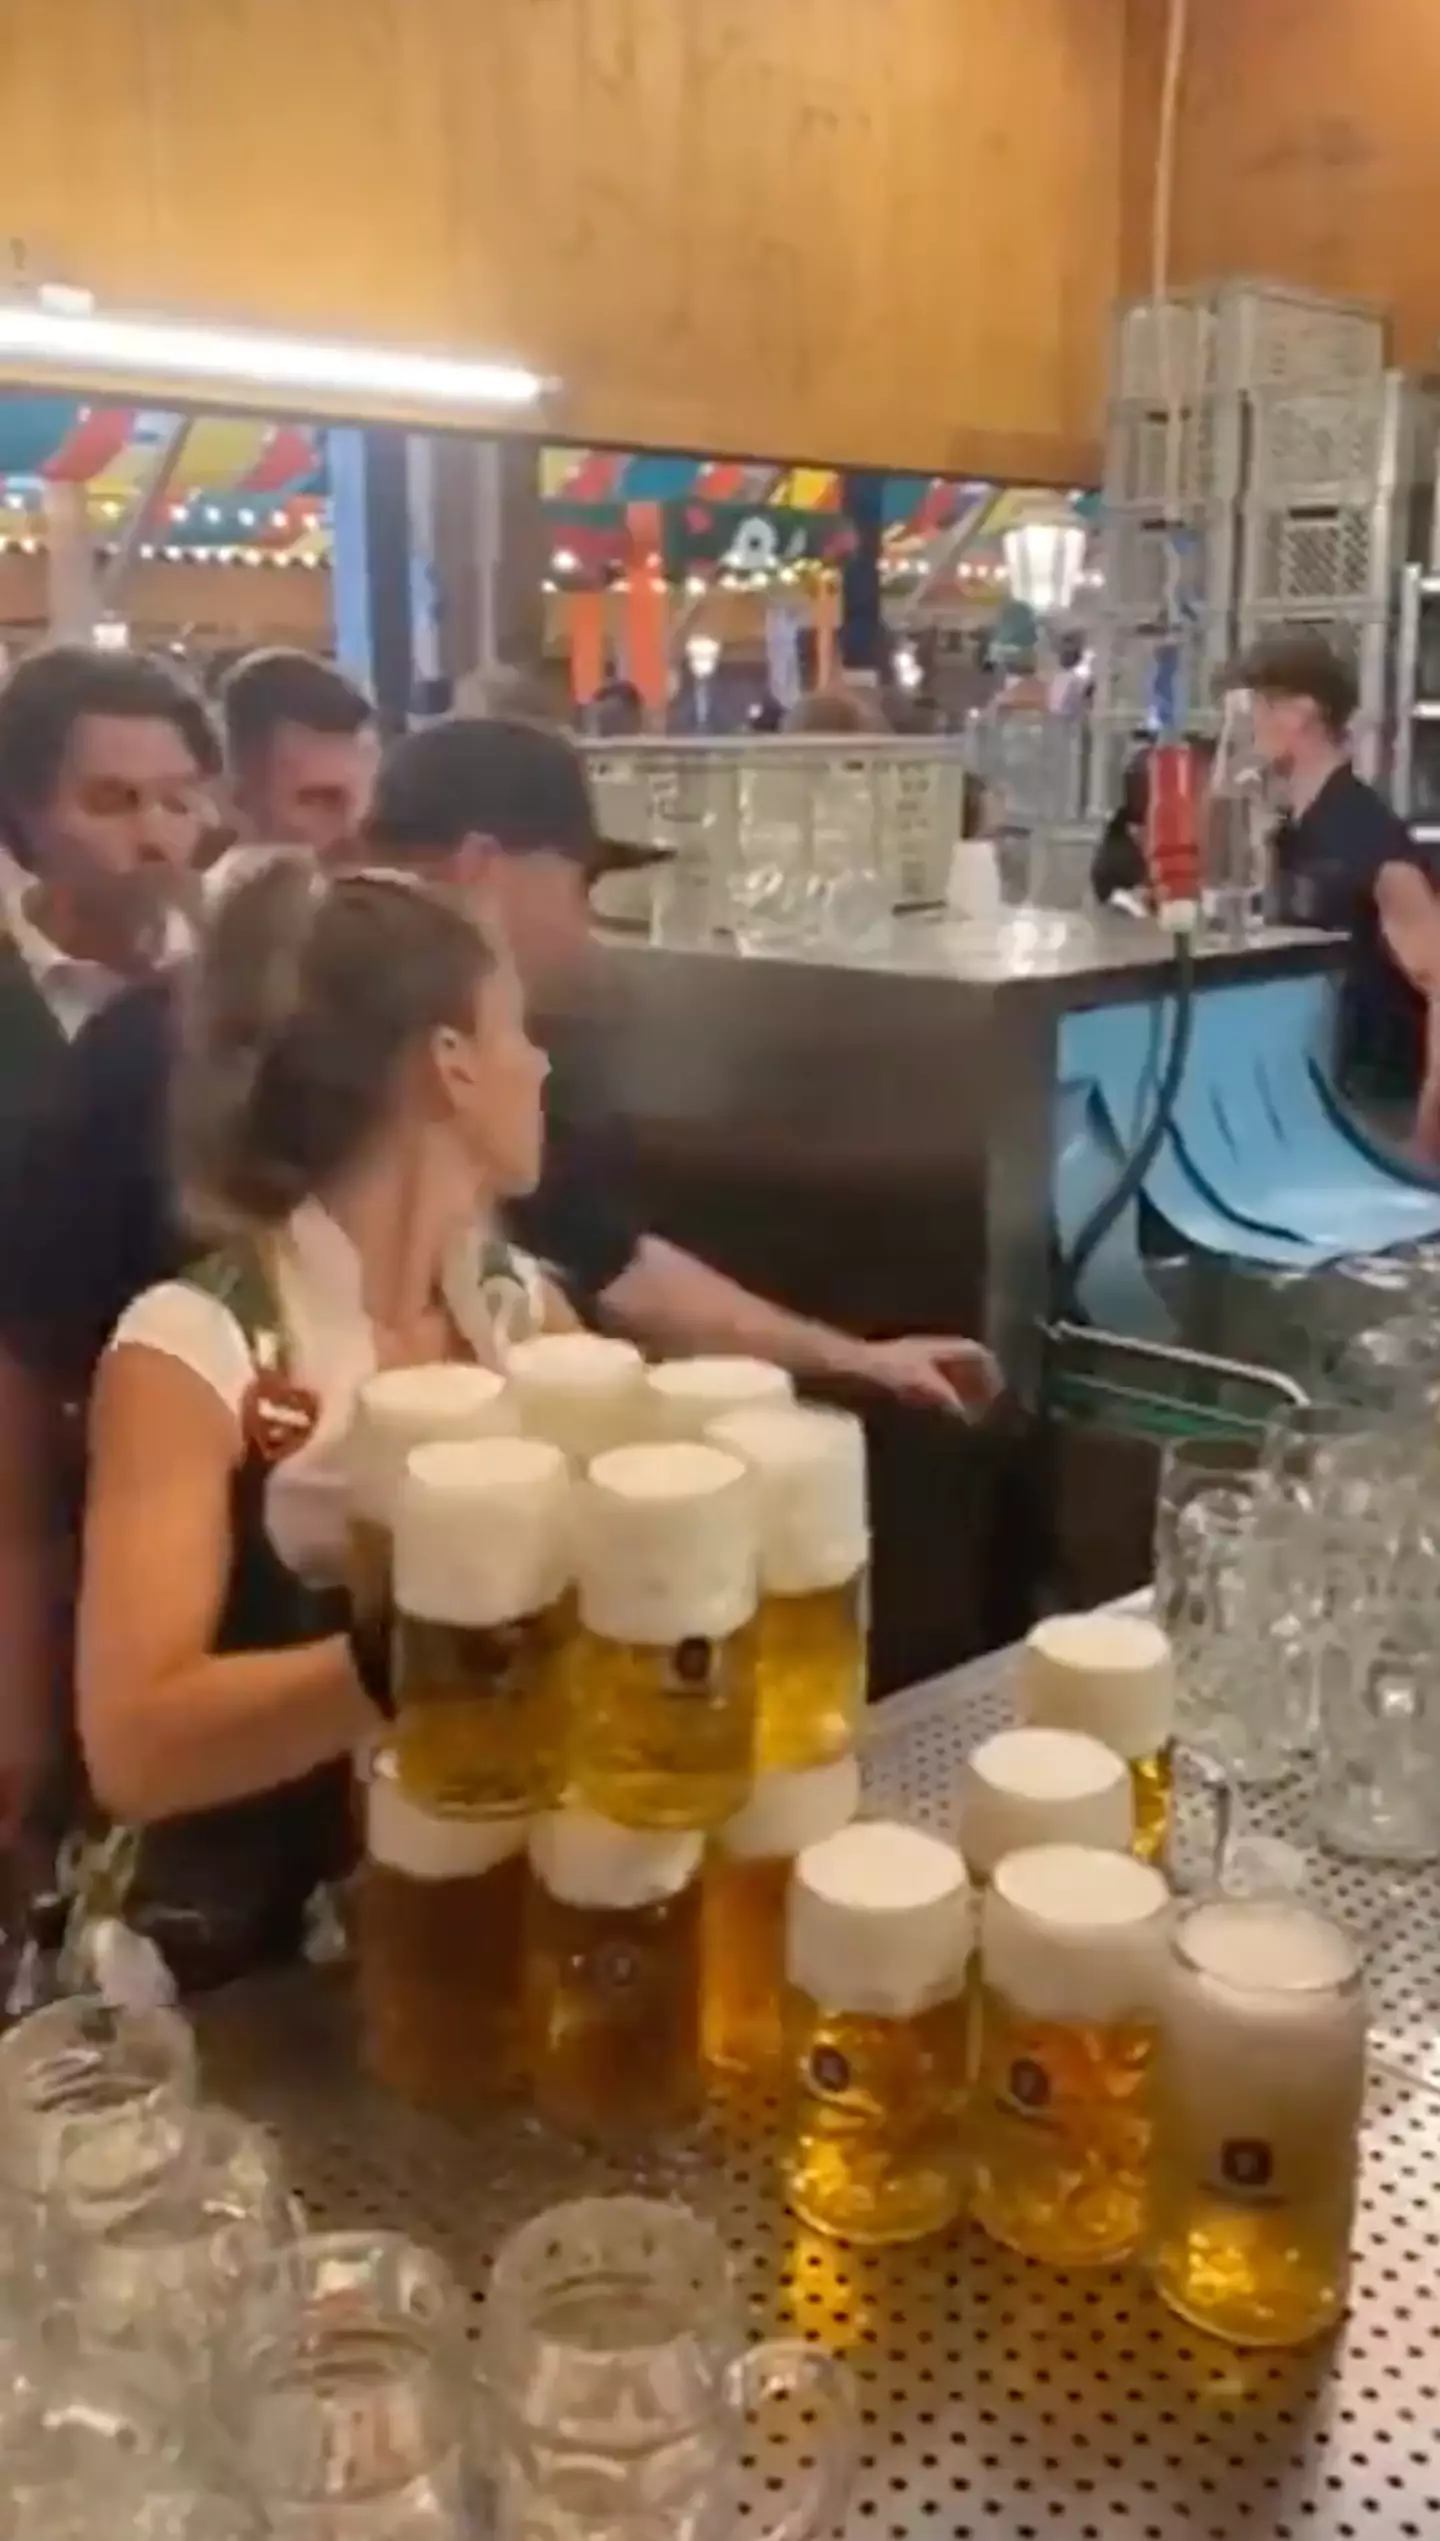 The waitress managed to hold a whopping 13 steins.